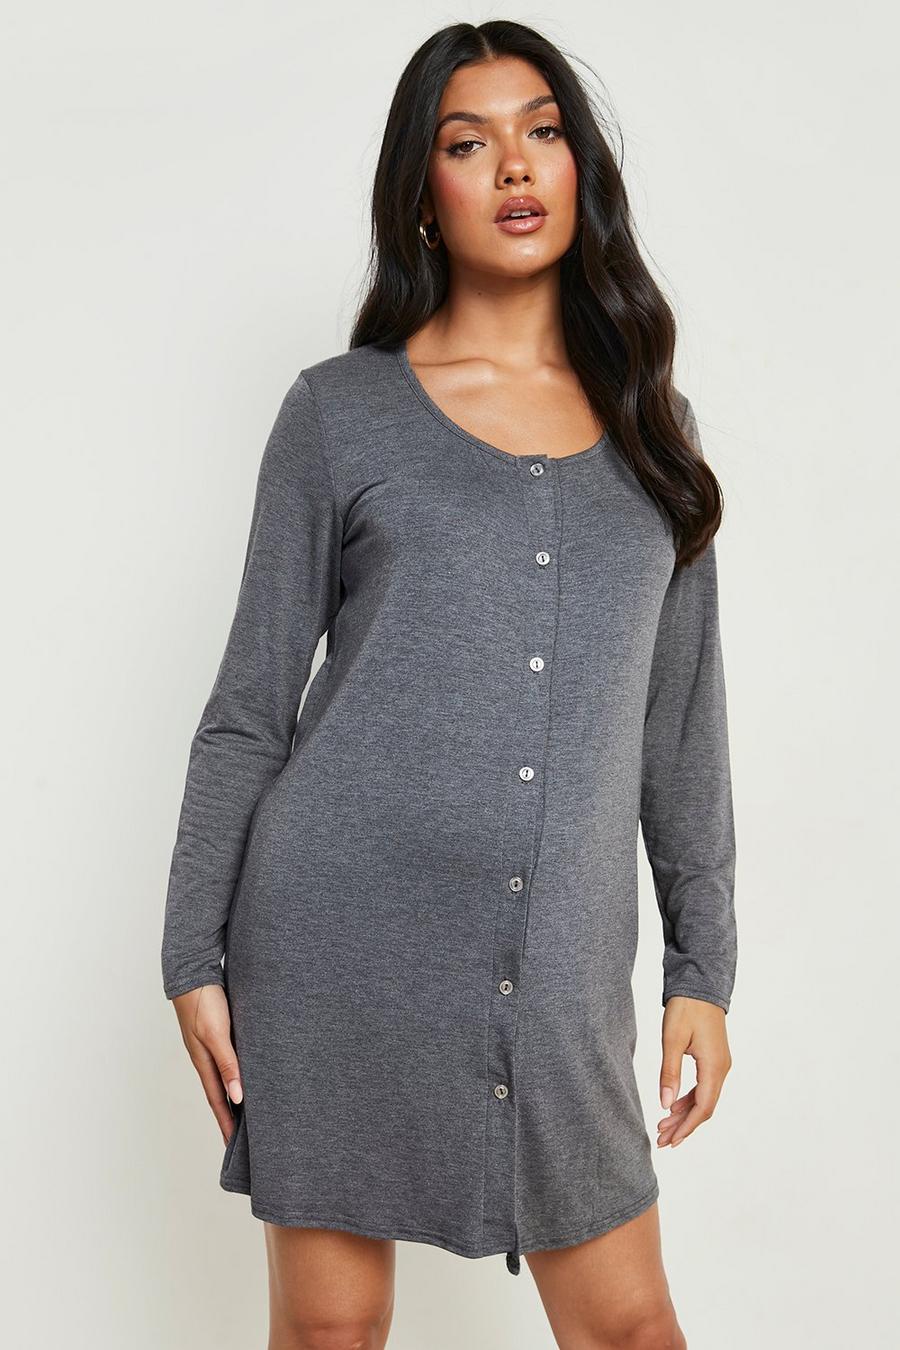 Charcoal grey Maternity Long Sleeve Button Front Nightie